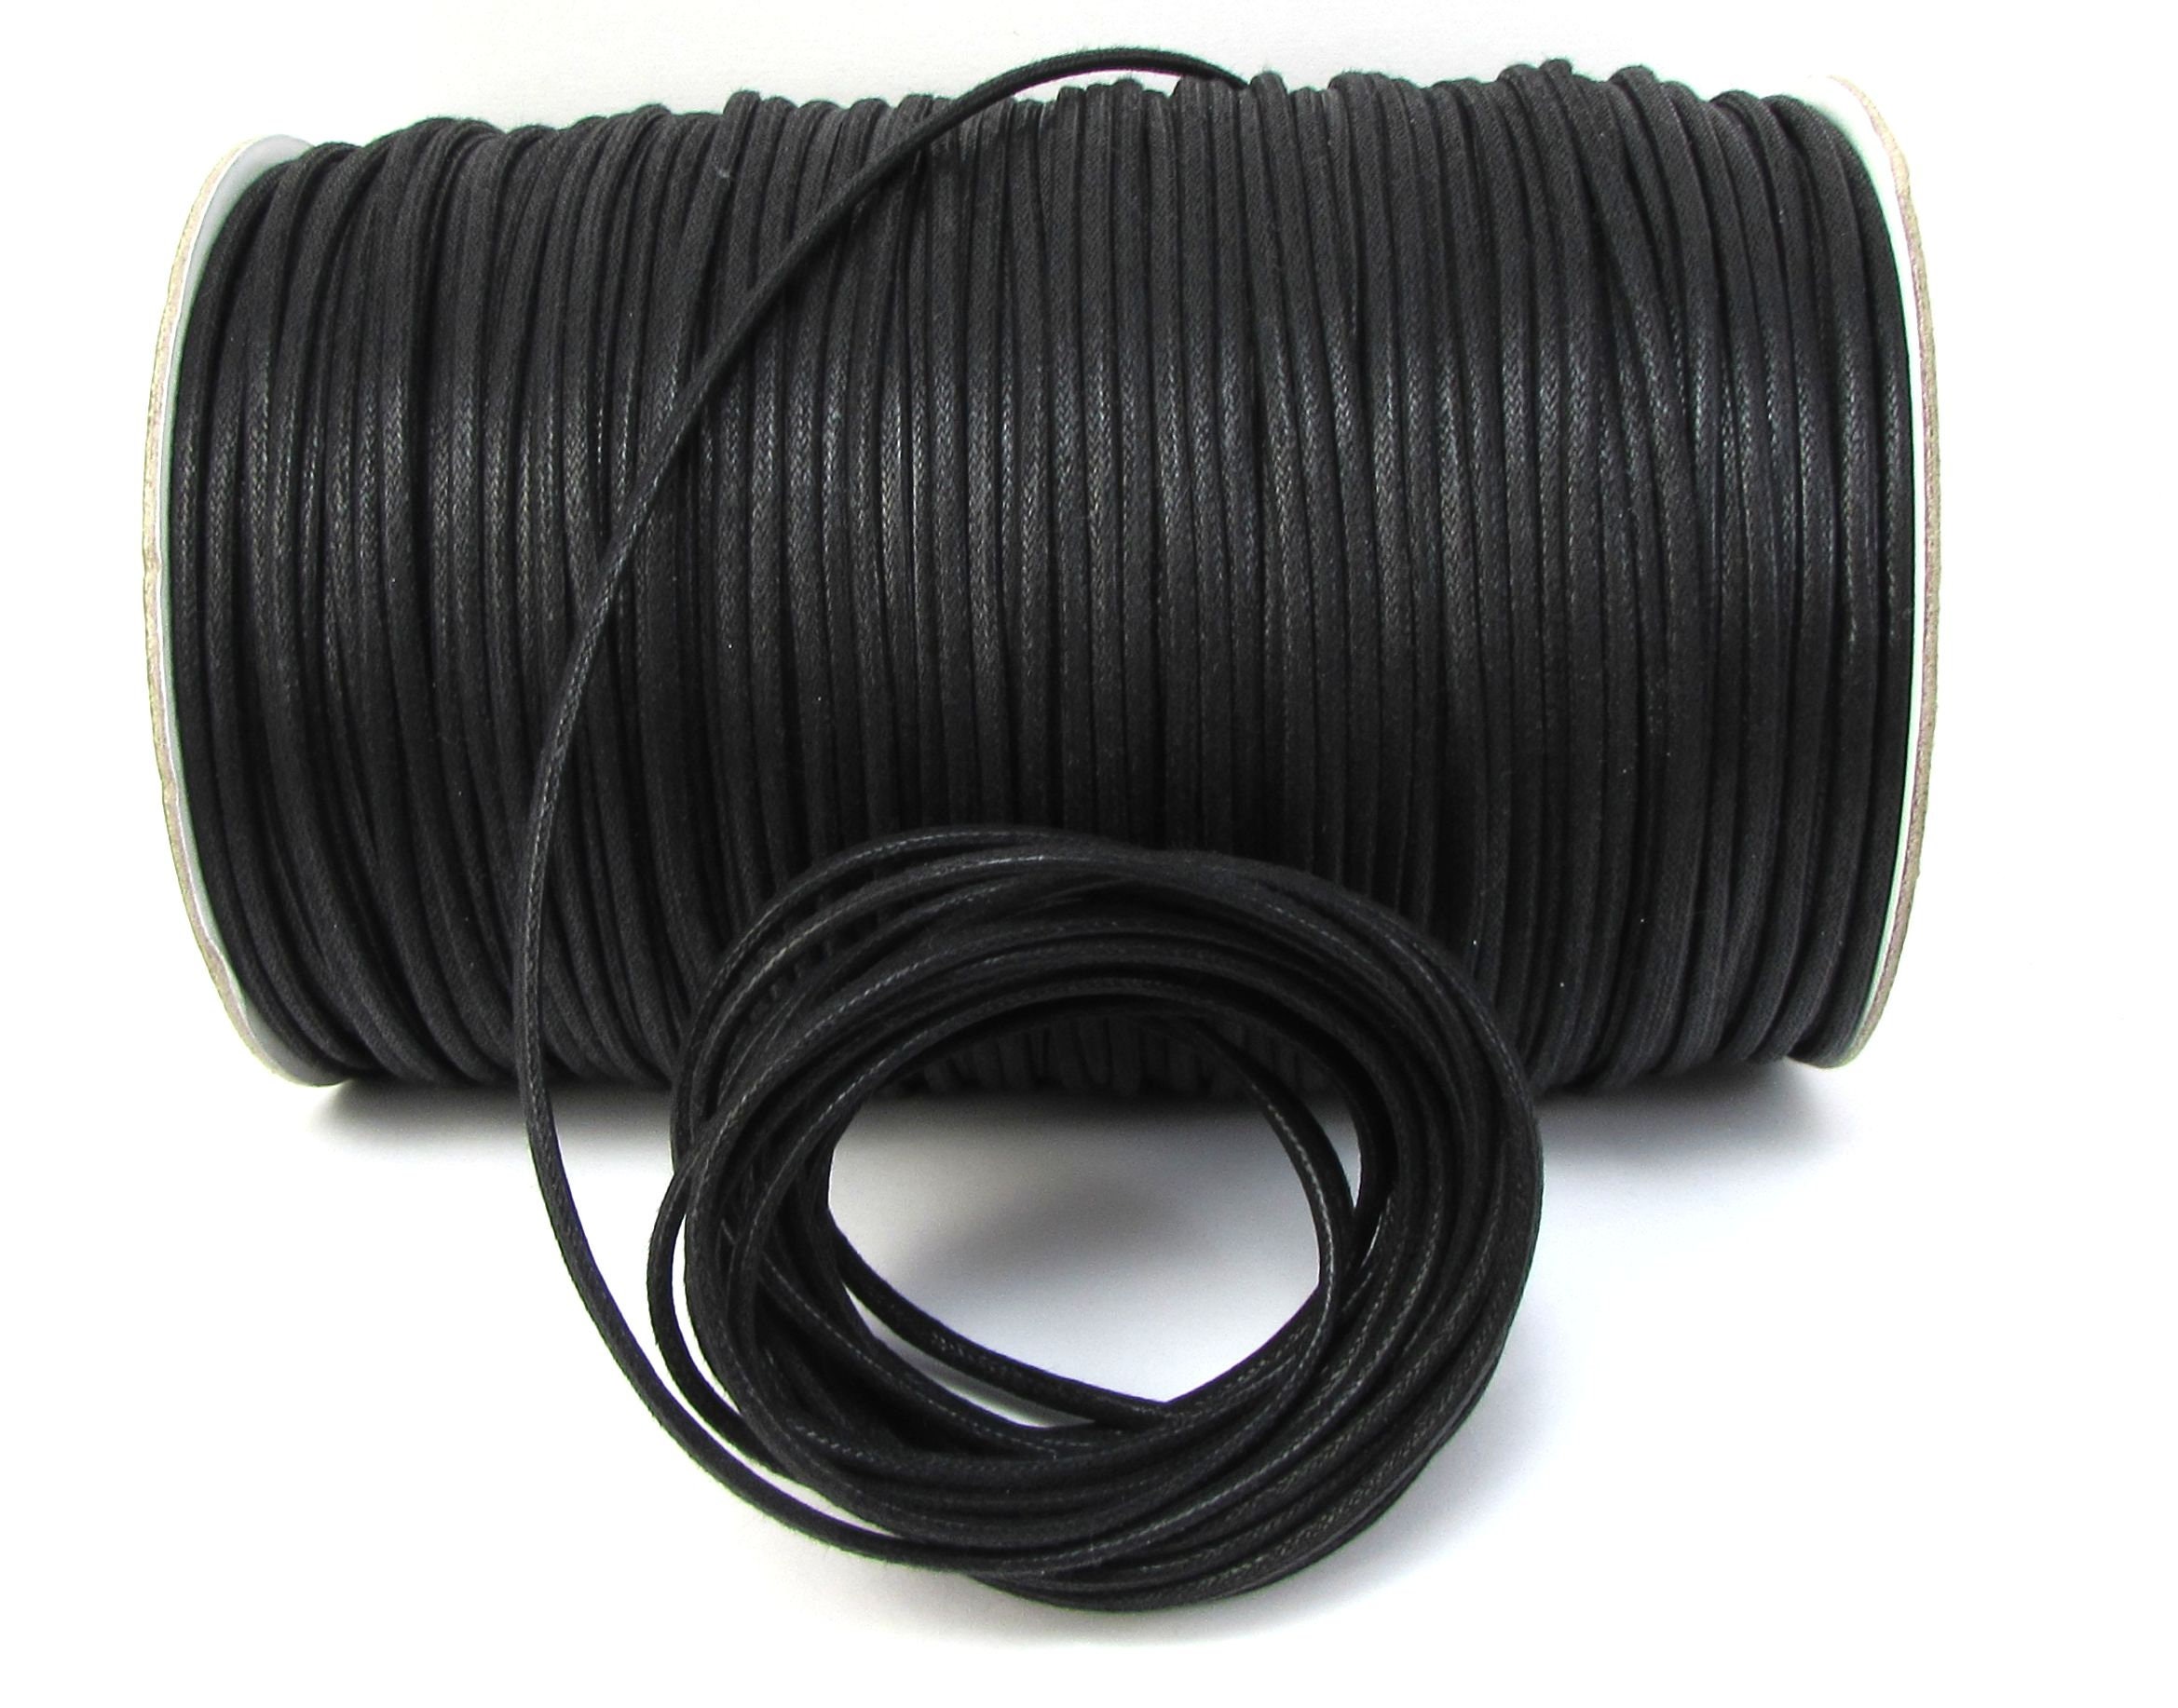 Black Cotton Cord, 3mm Waxed Cotton Cord, 5 Yards Black Cord, 15 Feet  Cotton Necklace Cord, Item 634ct -  Ireland